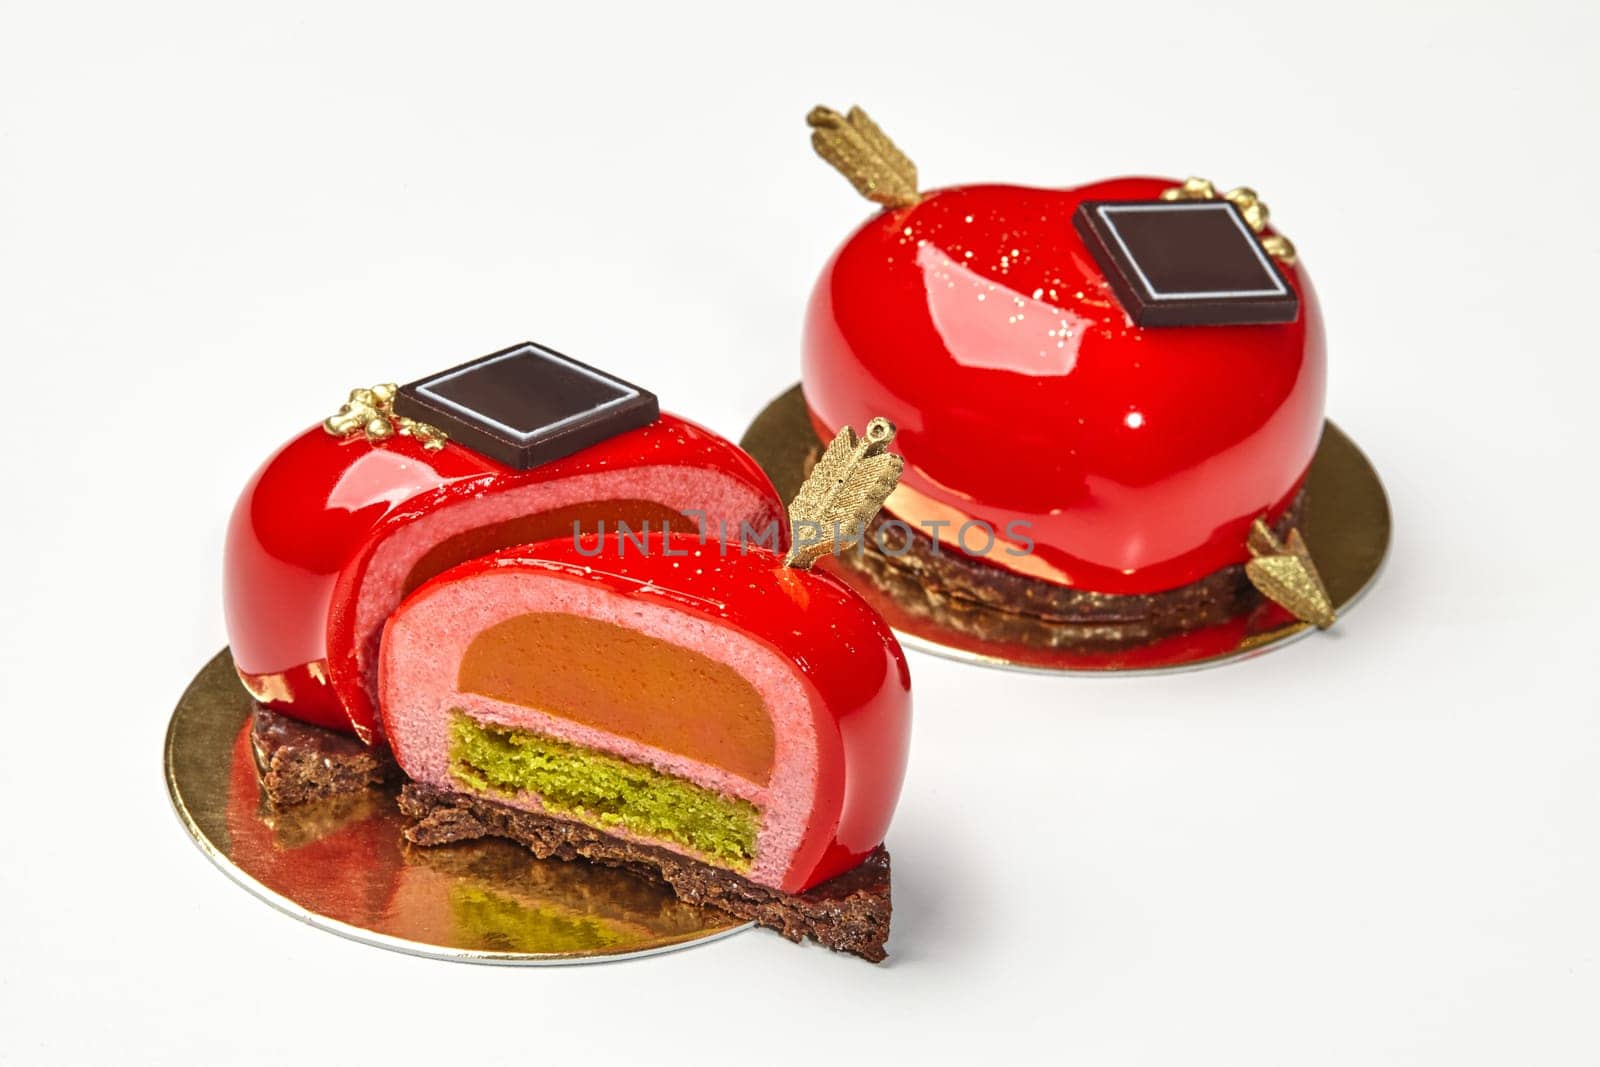 Closeup of sliced artisan dessert in shape of heart with golden arrow and layers of delicate berry mousse, sea buckthorn jelly and pistachio sponge on crispy chocolate streusel